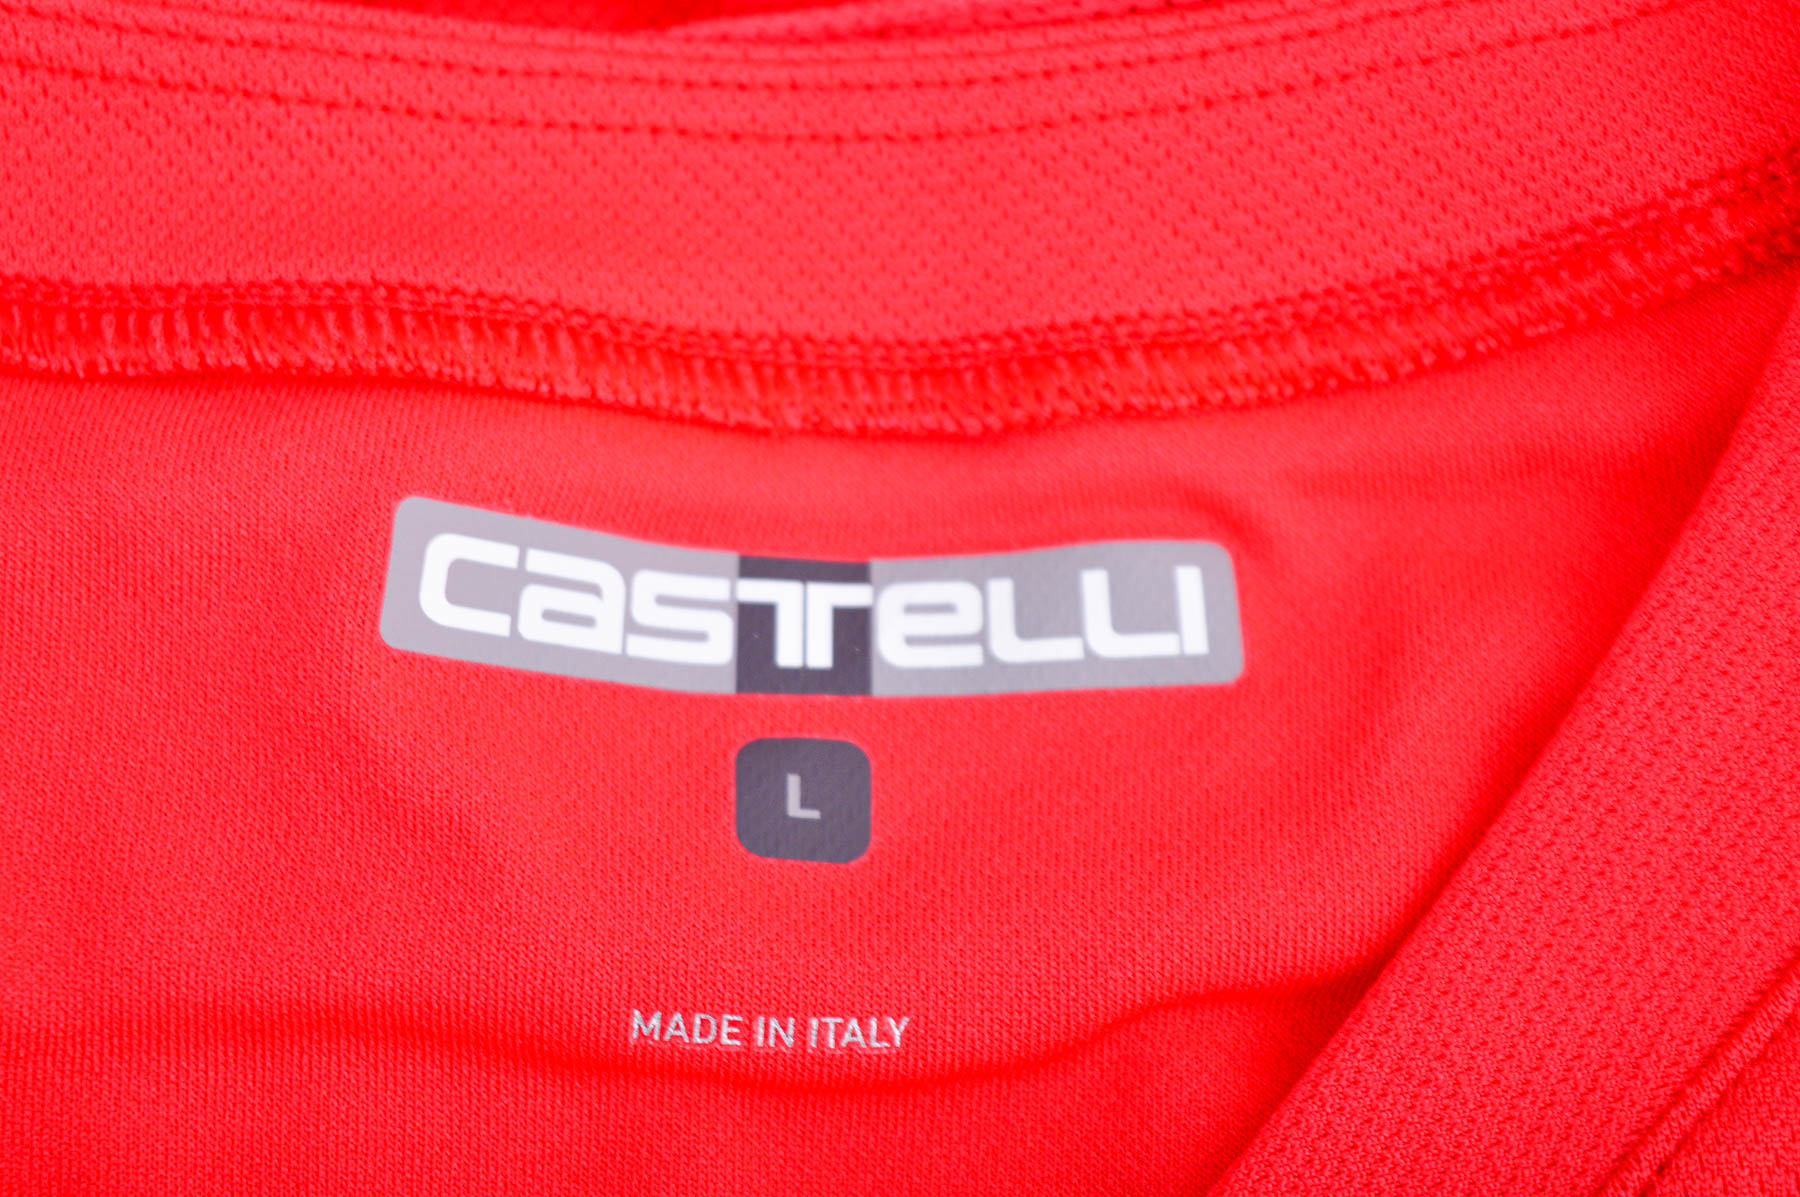 Women's vest for cycling - Castelli - 2